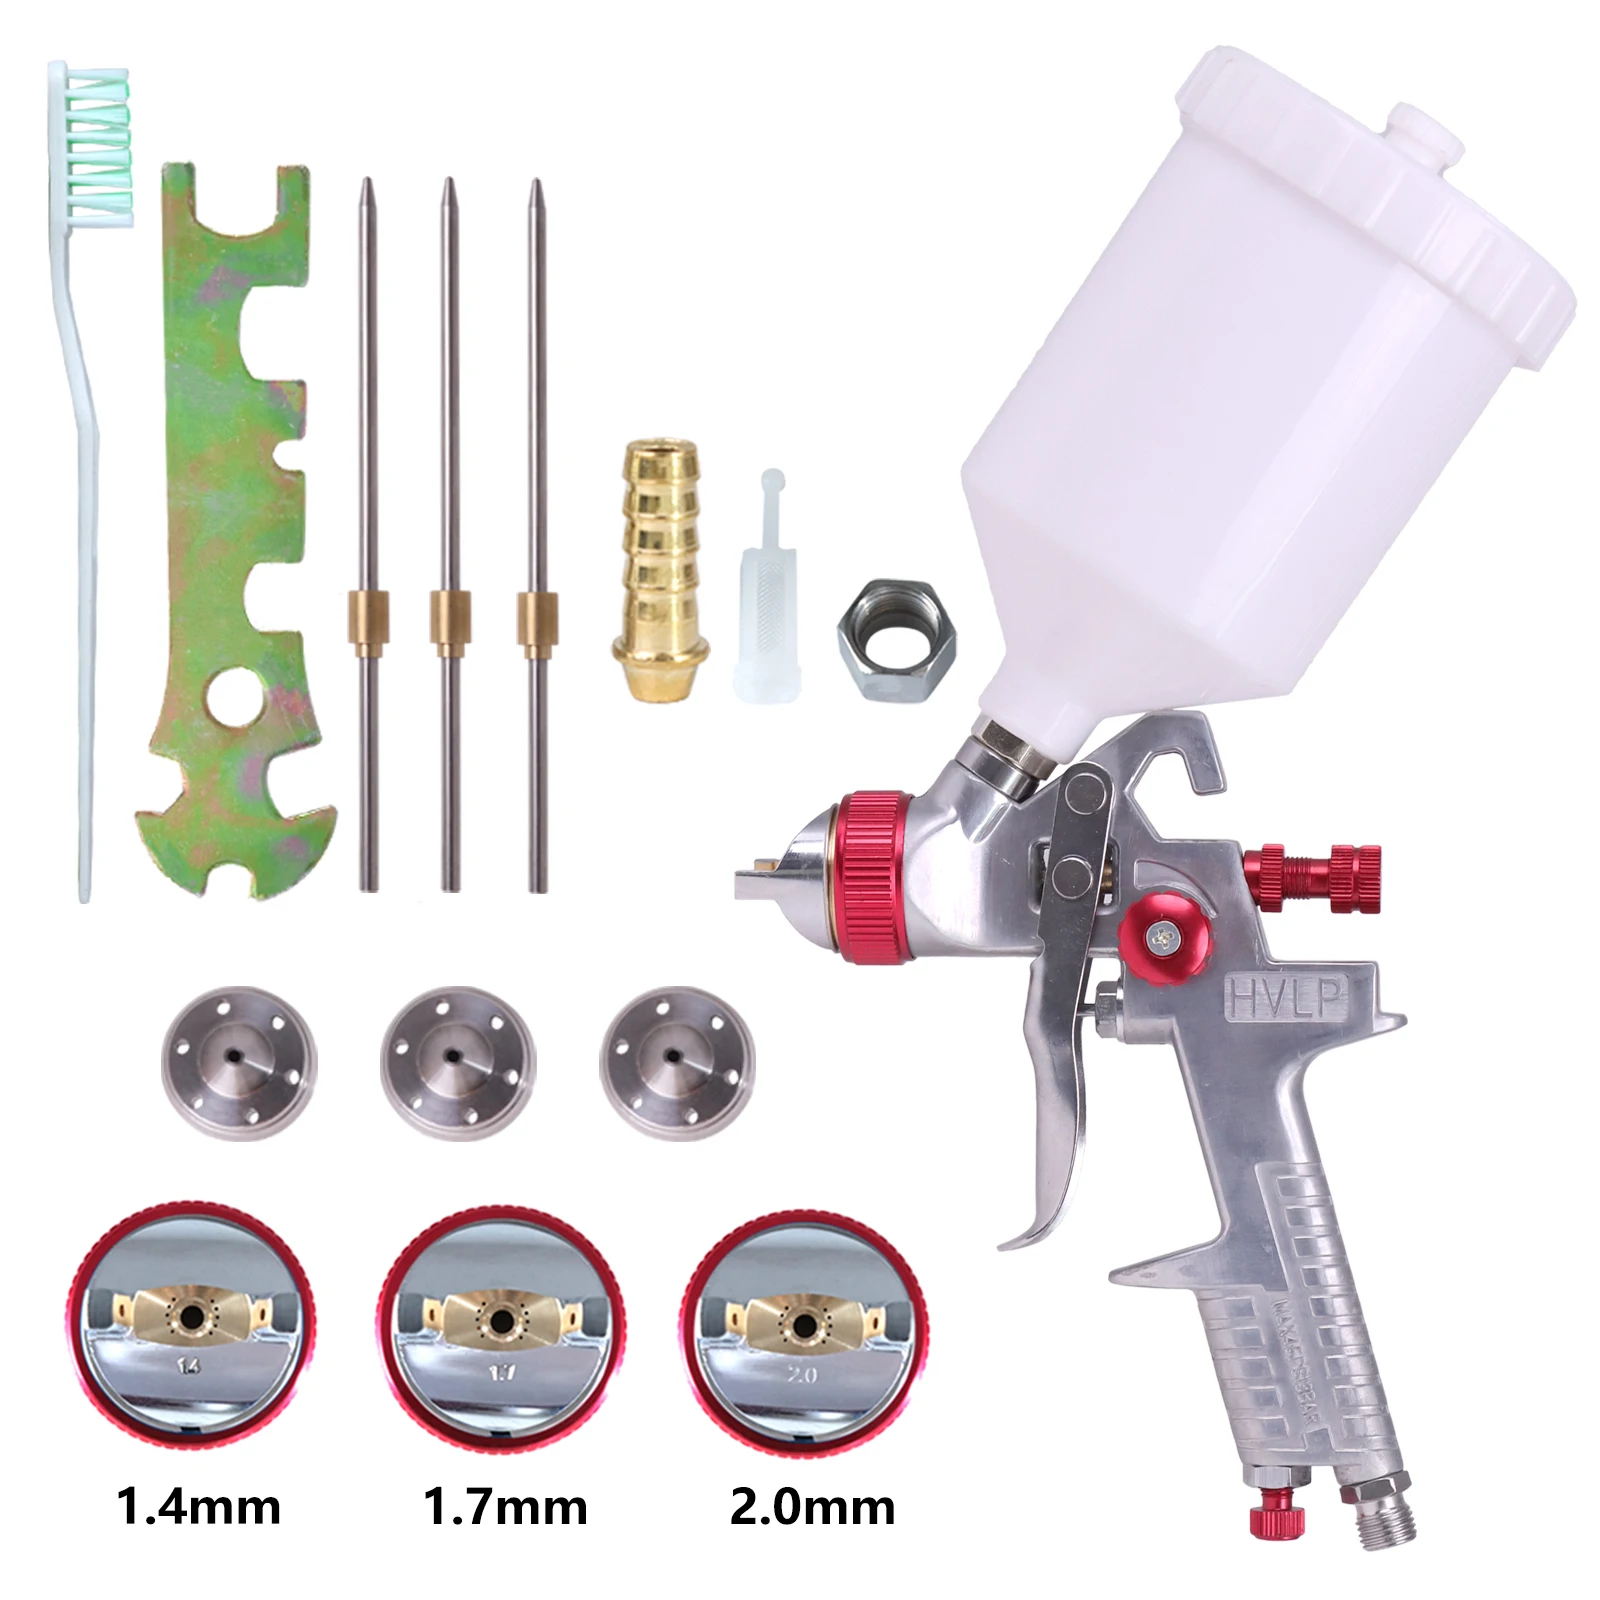 

WENXING High Quality 1.4/1.7/2.0mm Nozzle Professional HVLP Spray Gun 600ML Gravity Feed Airbrush Kit For Car Furniture Painting